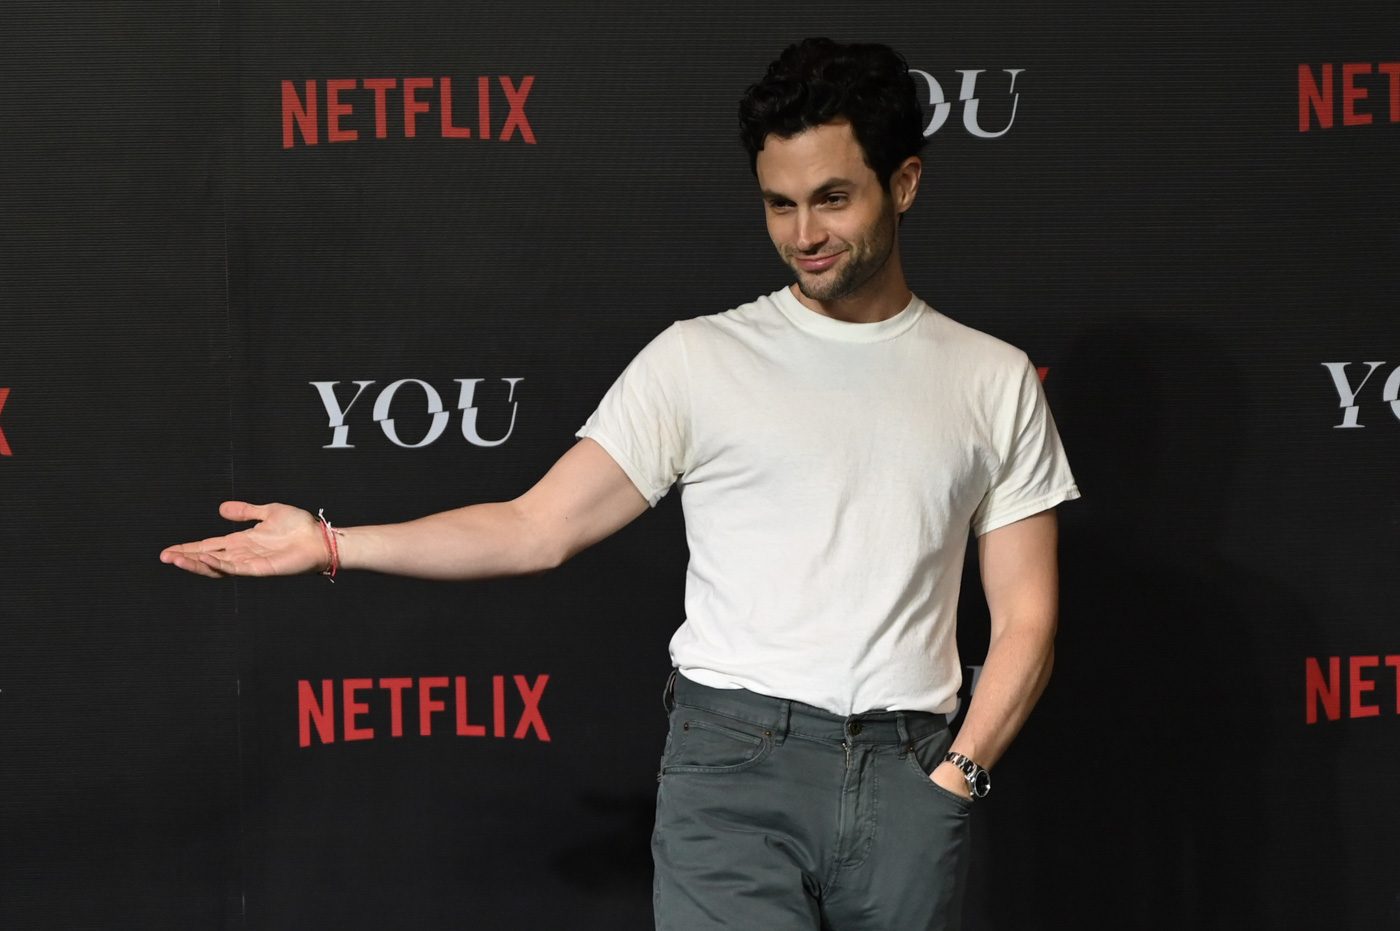 Penn Badgley is taking it ‘one creepy step at a time’ for ‘You’ season 2